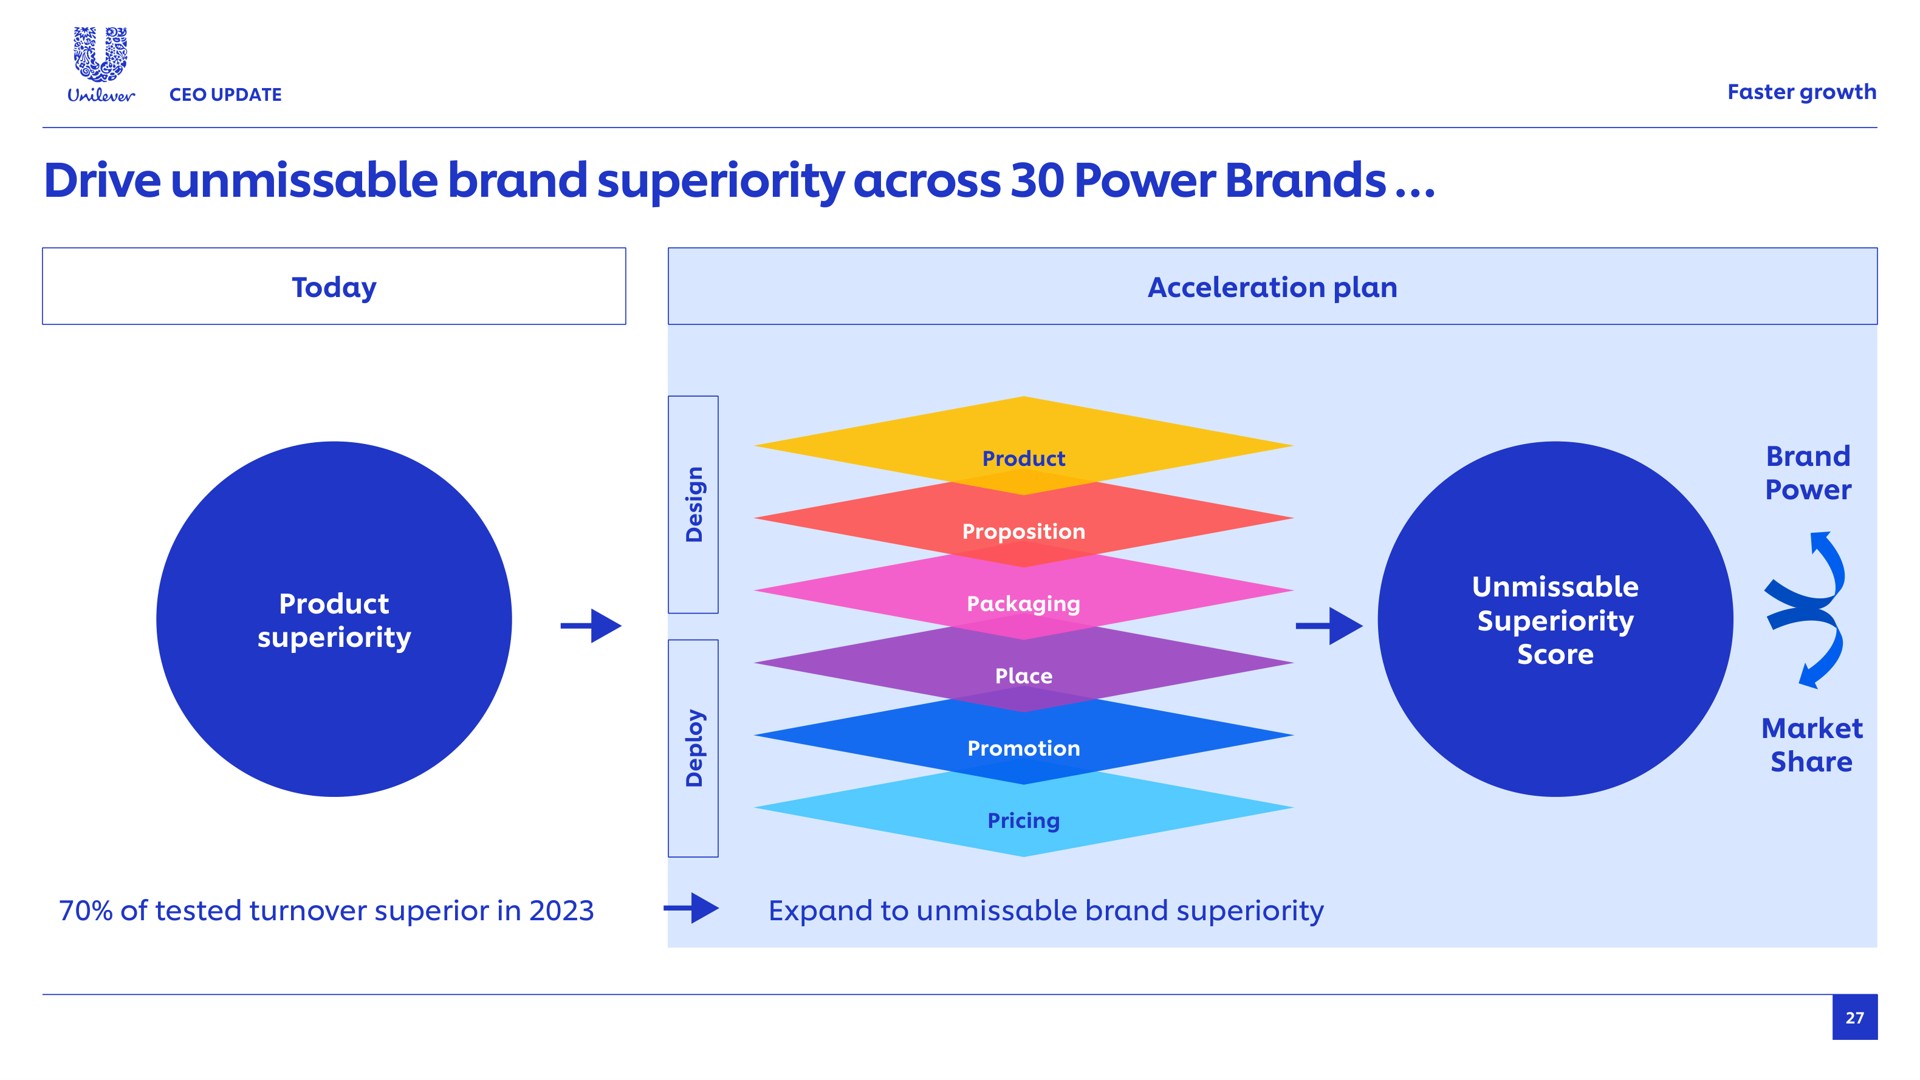 drive unmissable brand superiority across power brands as faster growth today acceleration plan product product proposition packaging place pricing score market share of tested turnover superior in expand to | Unilever